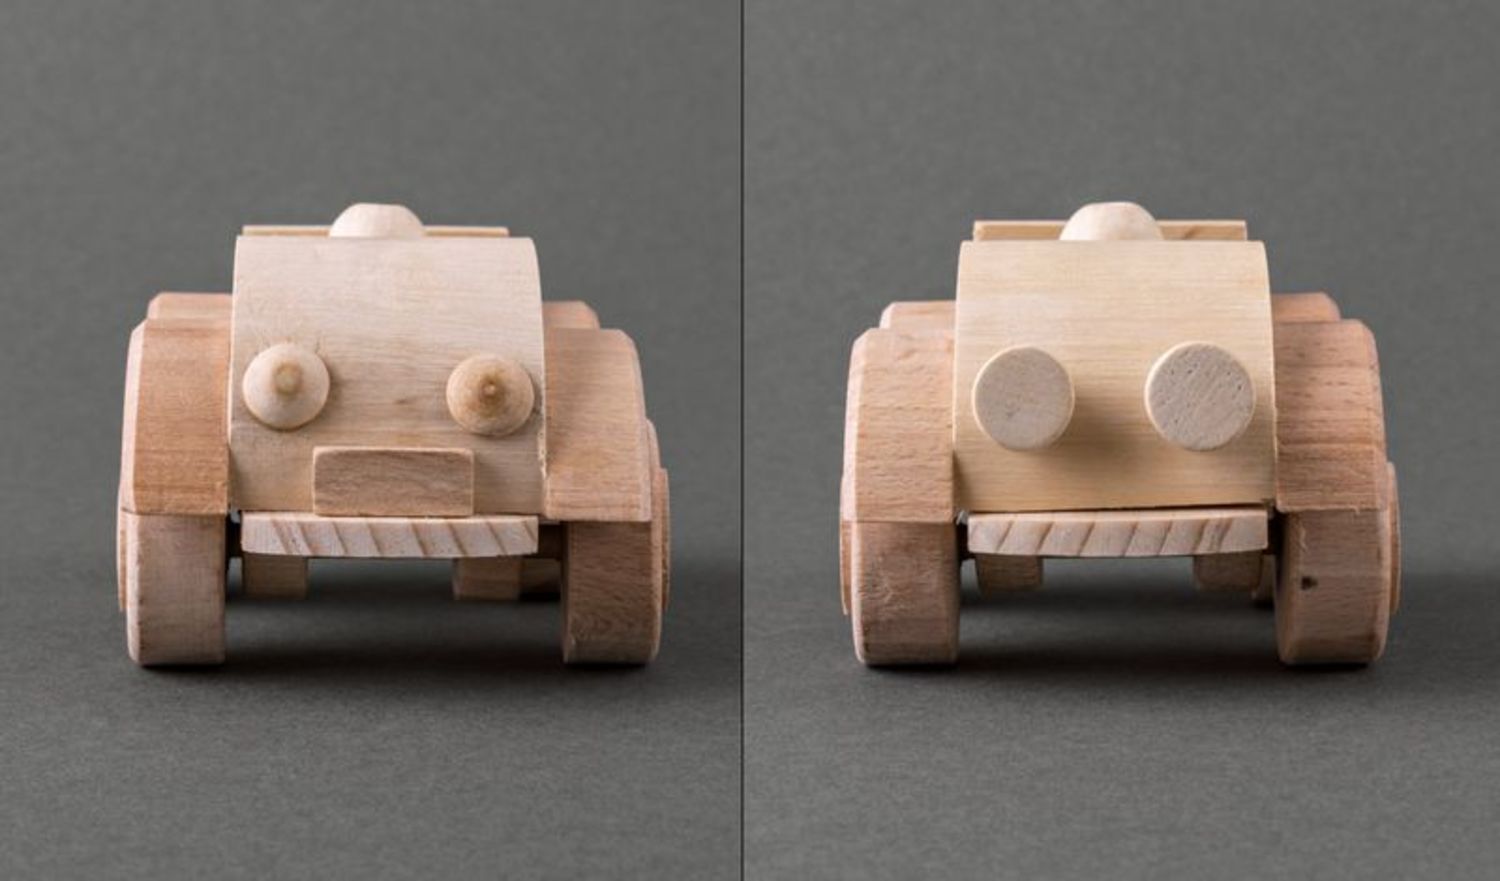 Toy car made of wood photo 3